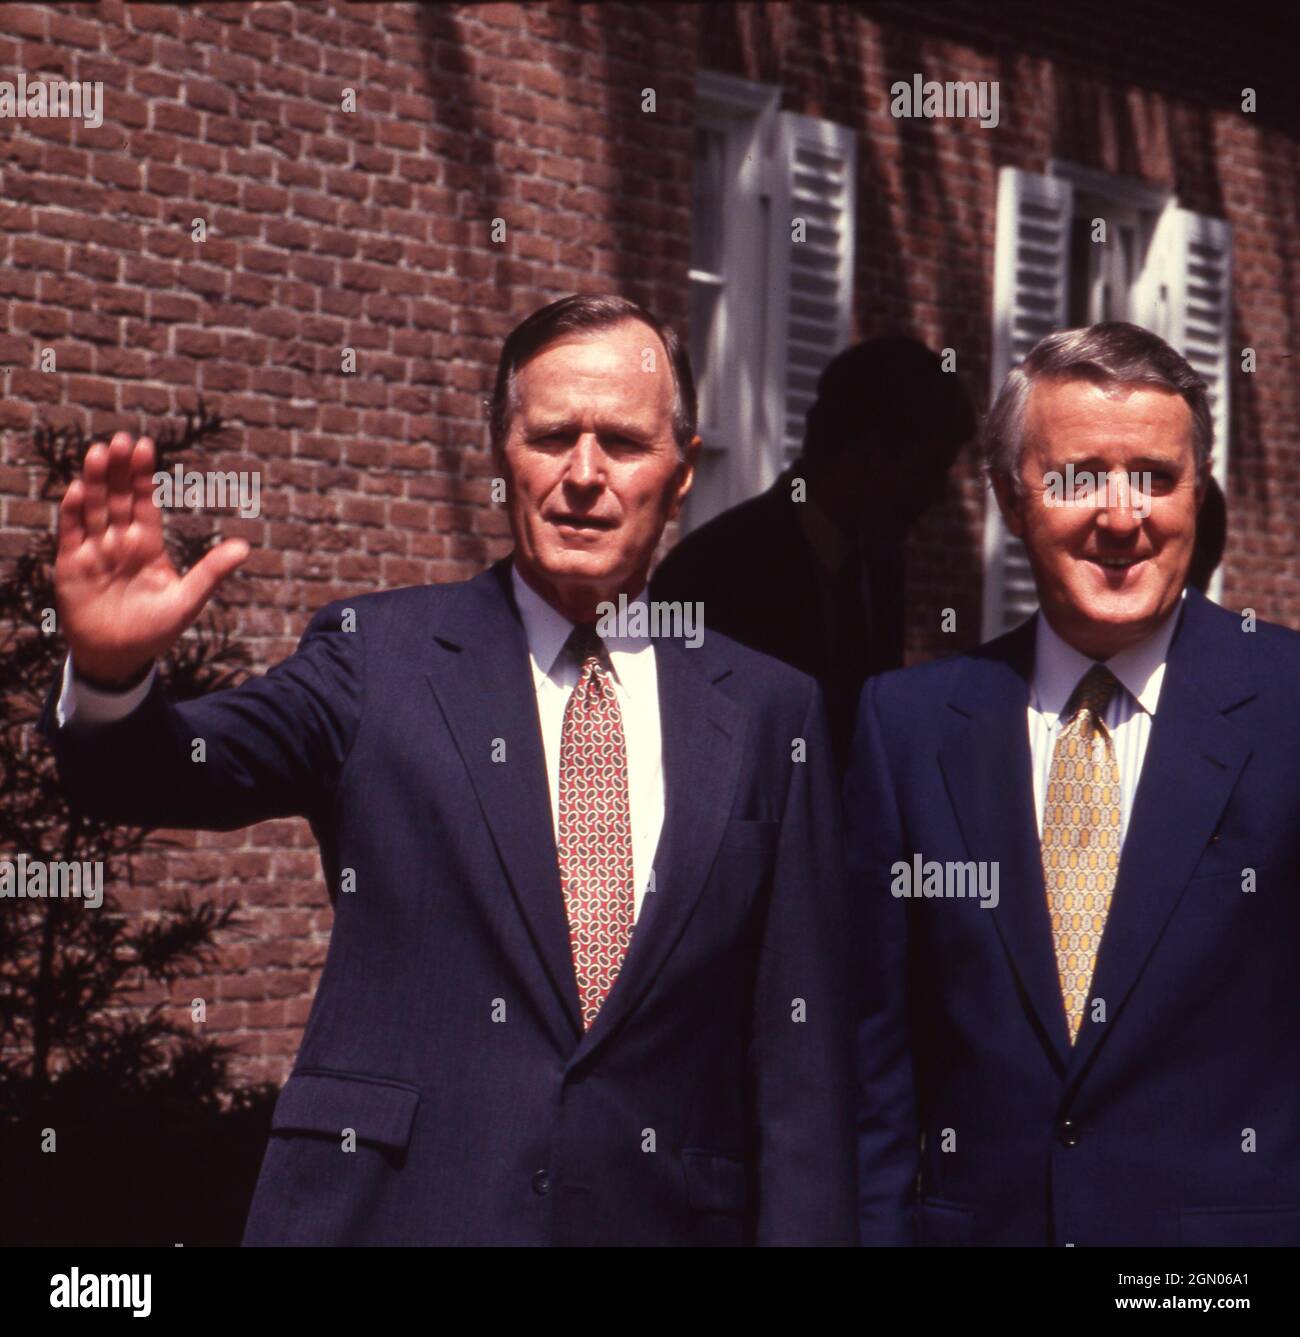 Houston Texas USA, July 1990: 1990 President George H.W. Bush with Canada Prime Minister Brian Mulroney during the 1990 Economic Summit of Industrialized Nations. ©Bob Daemmrich Stock Photo